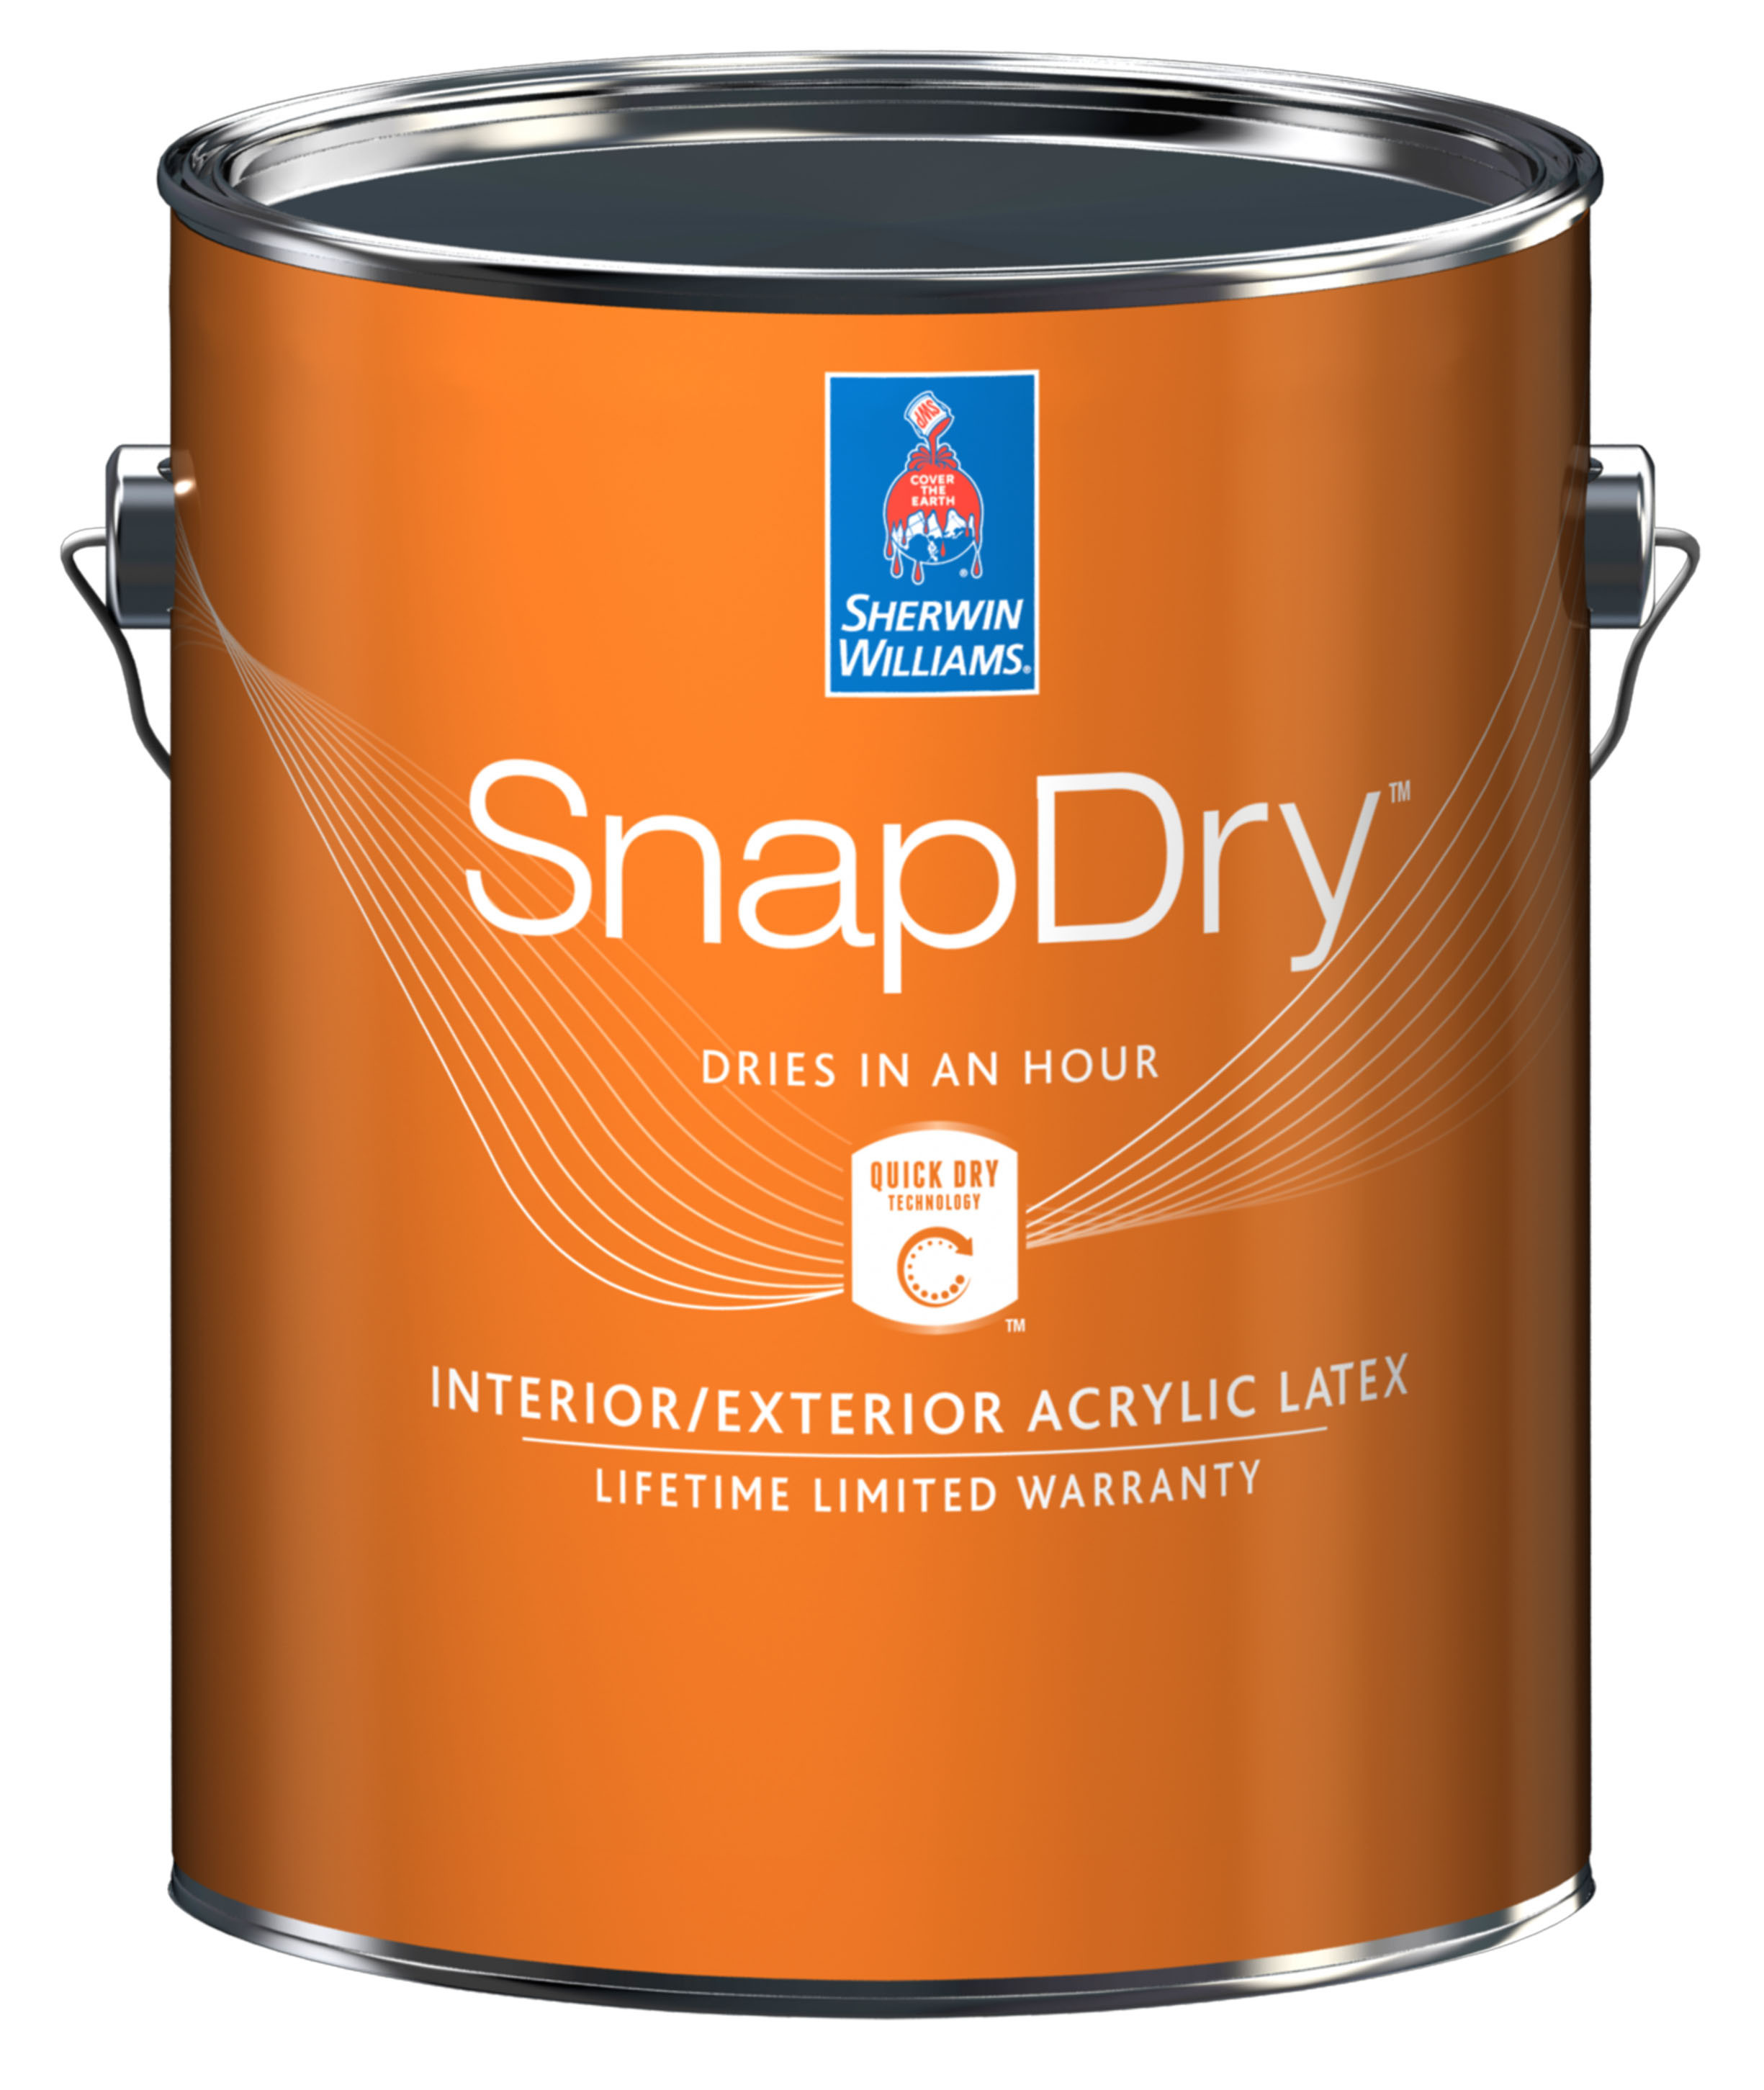 SnapDry paint